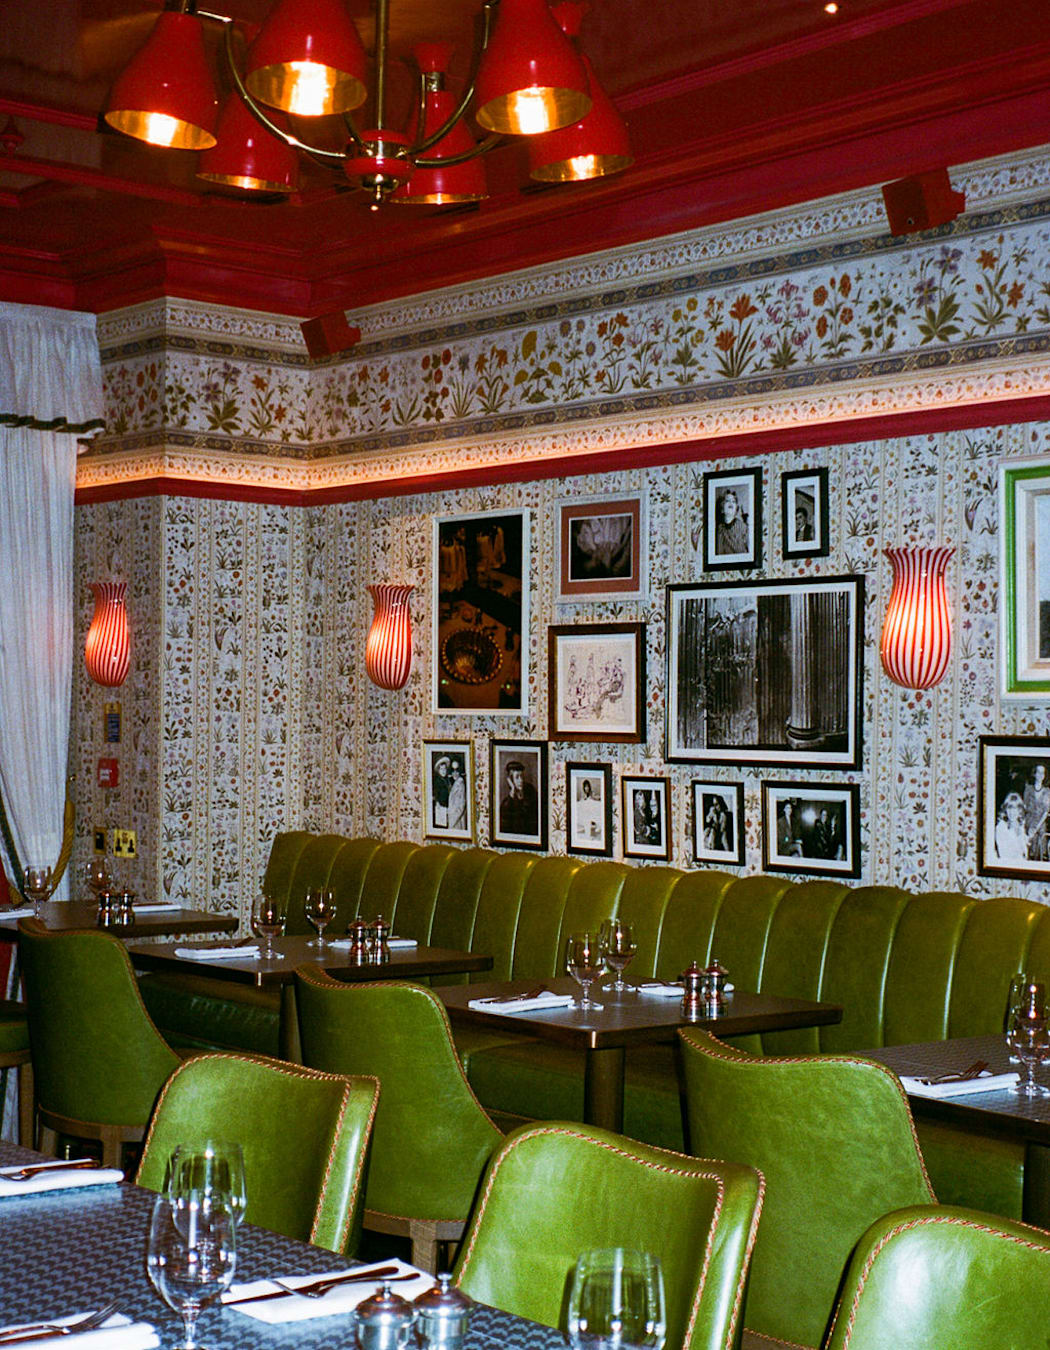 A flash film photo of a restaurant with green chairs and a red ceiling. Art hangs on the wallpaper walls.